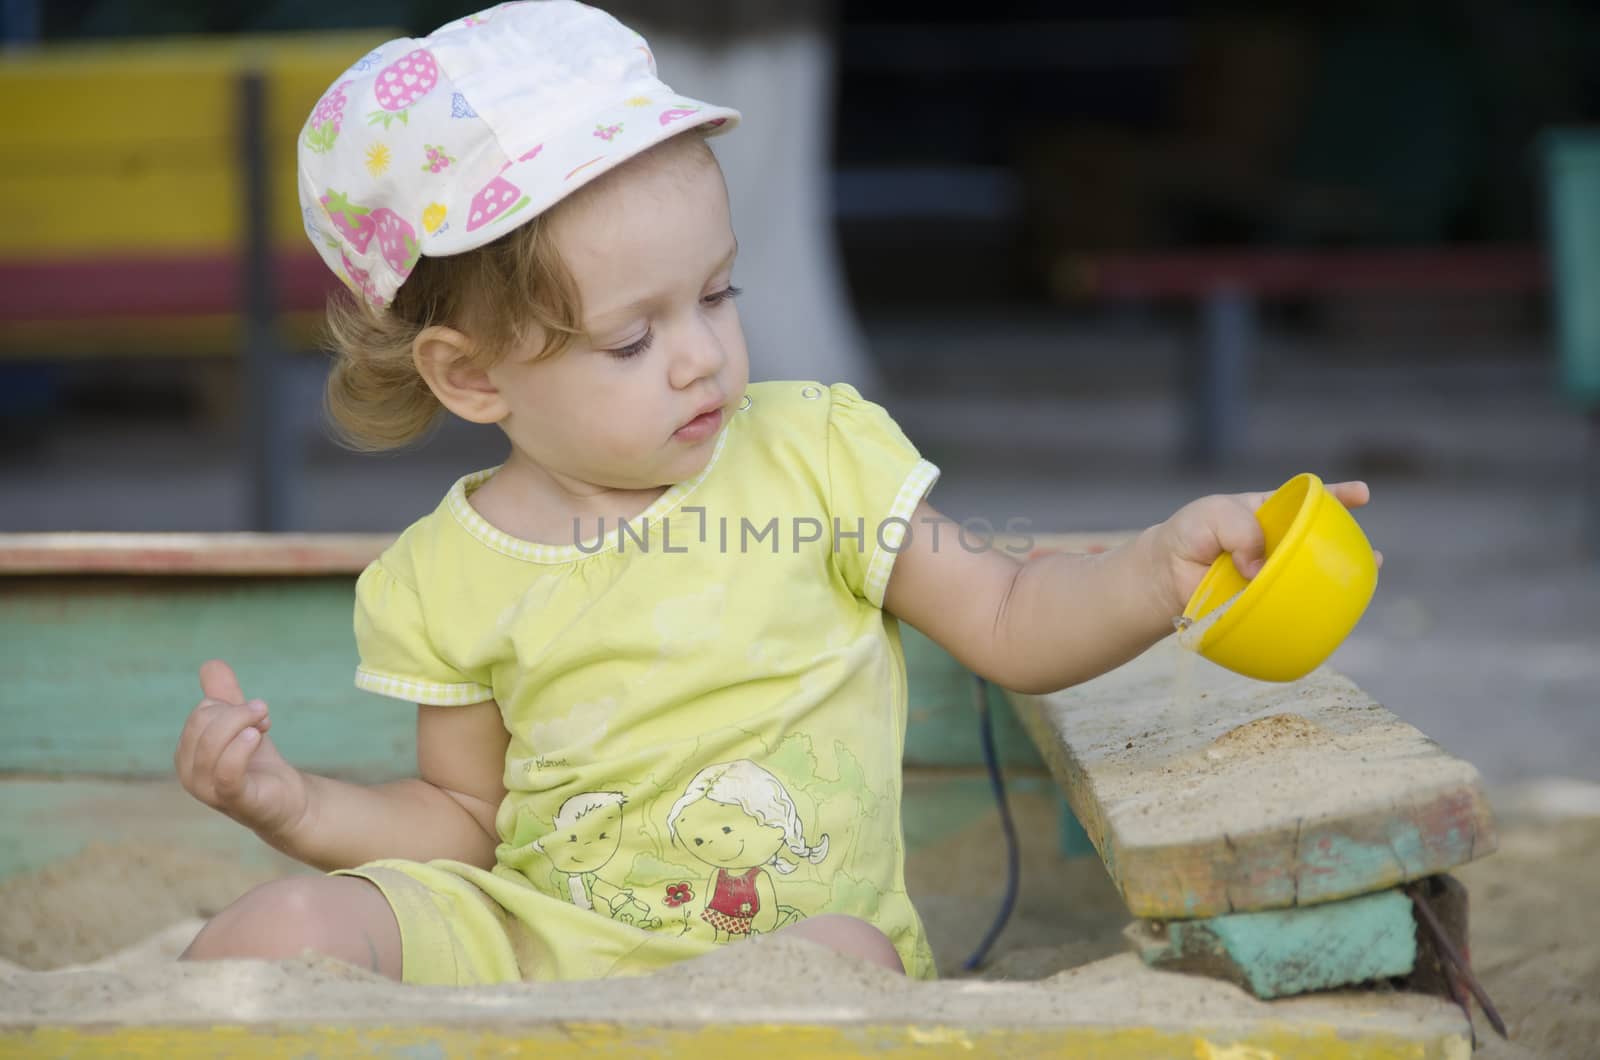  Little girl playing in the sandbox by Madhourse